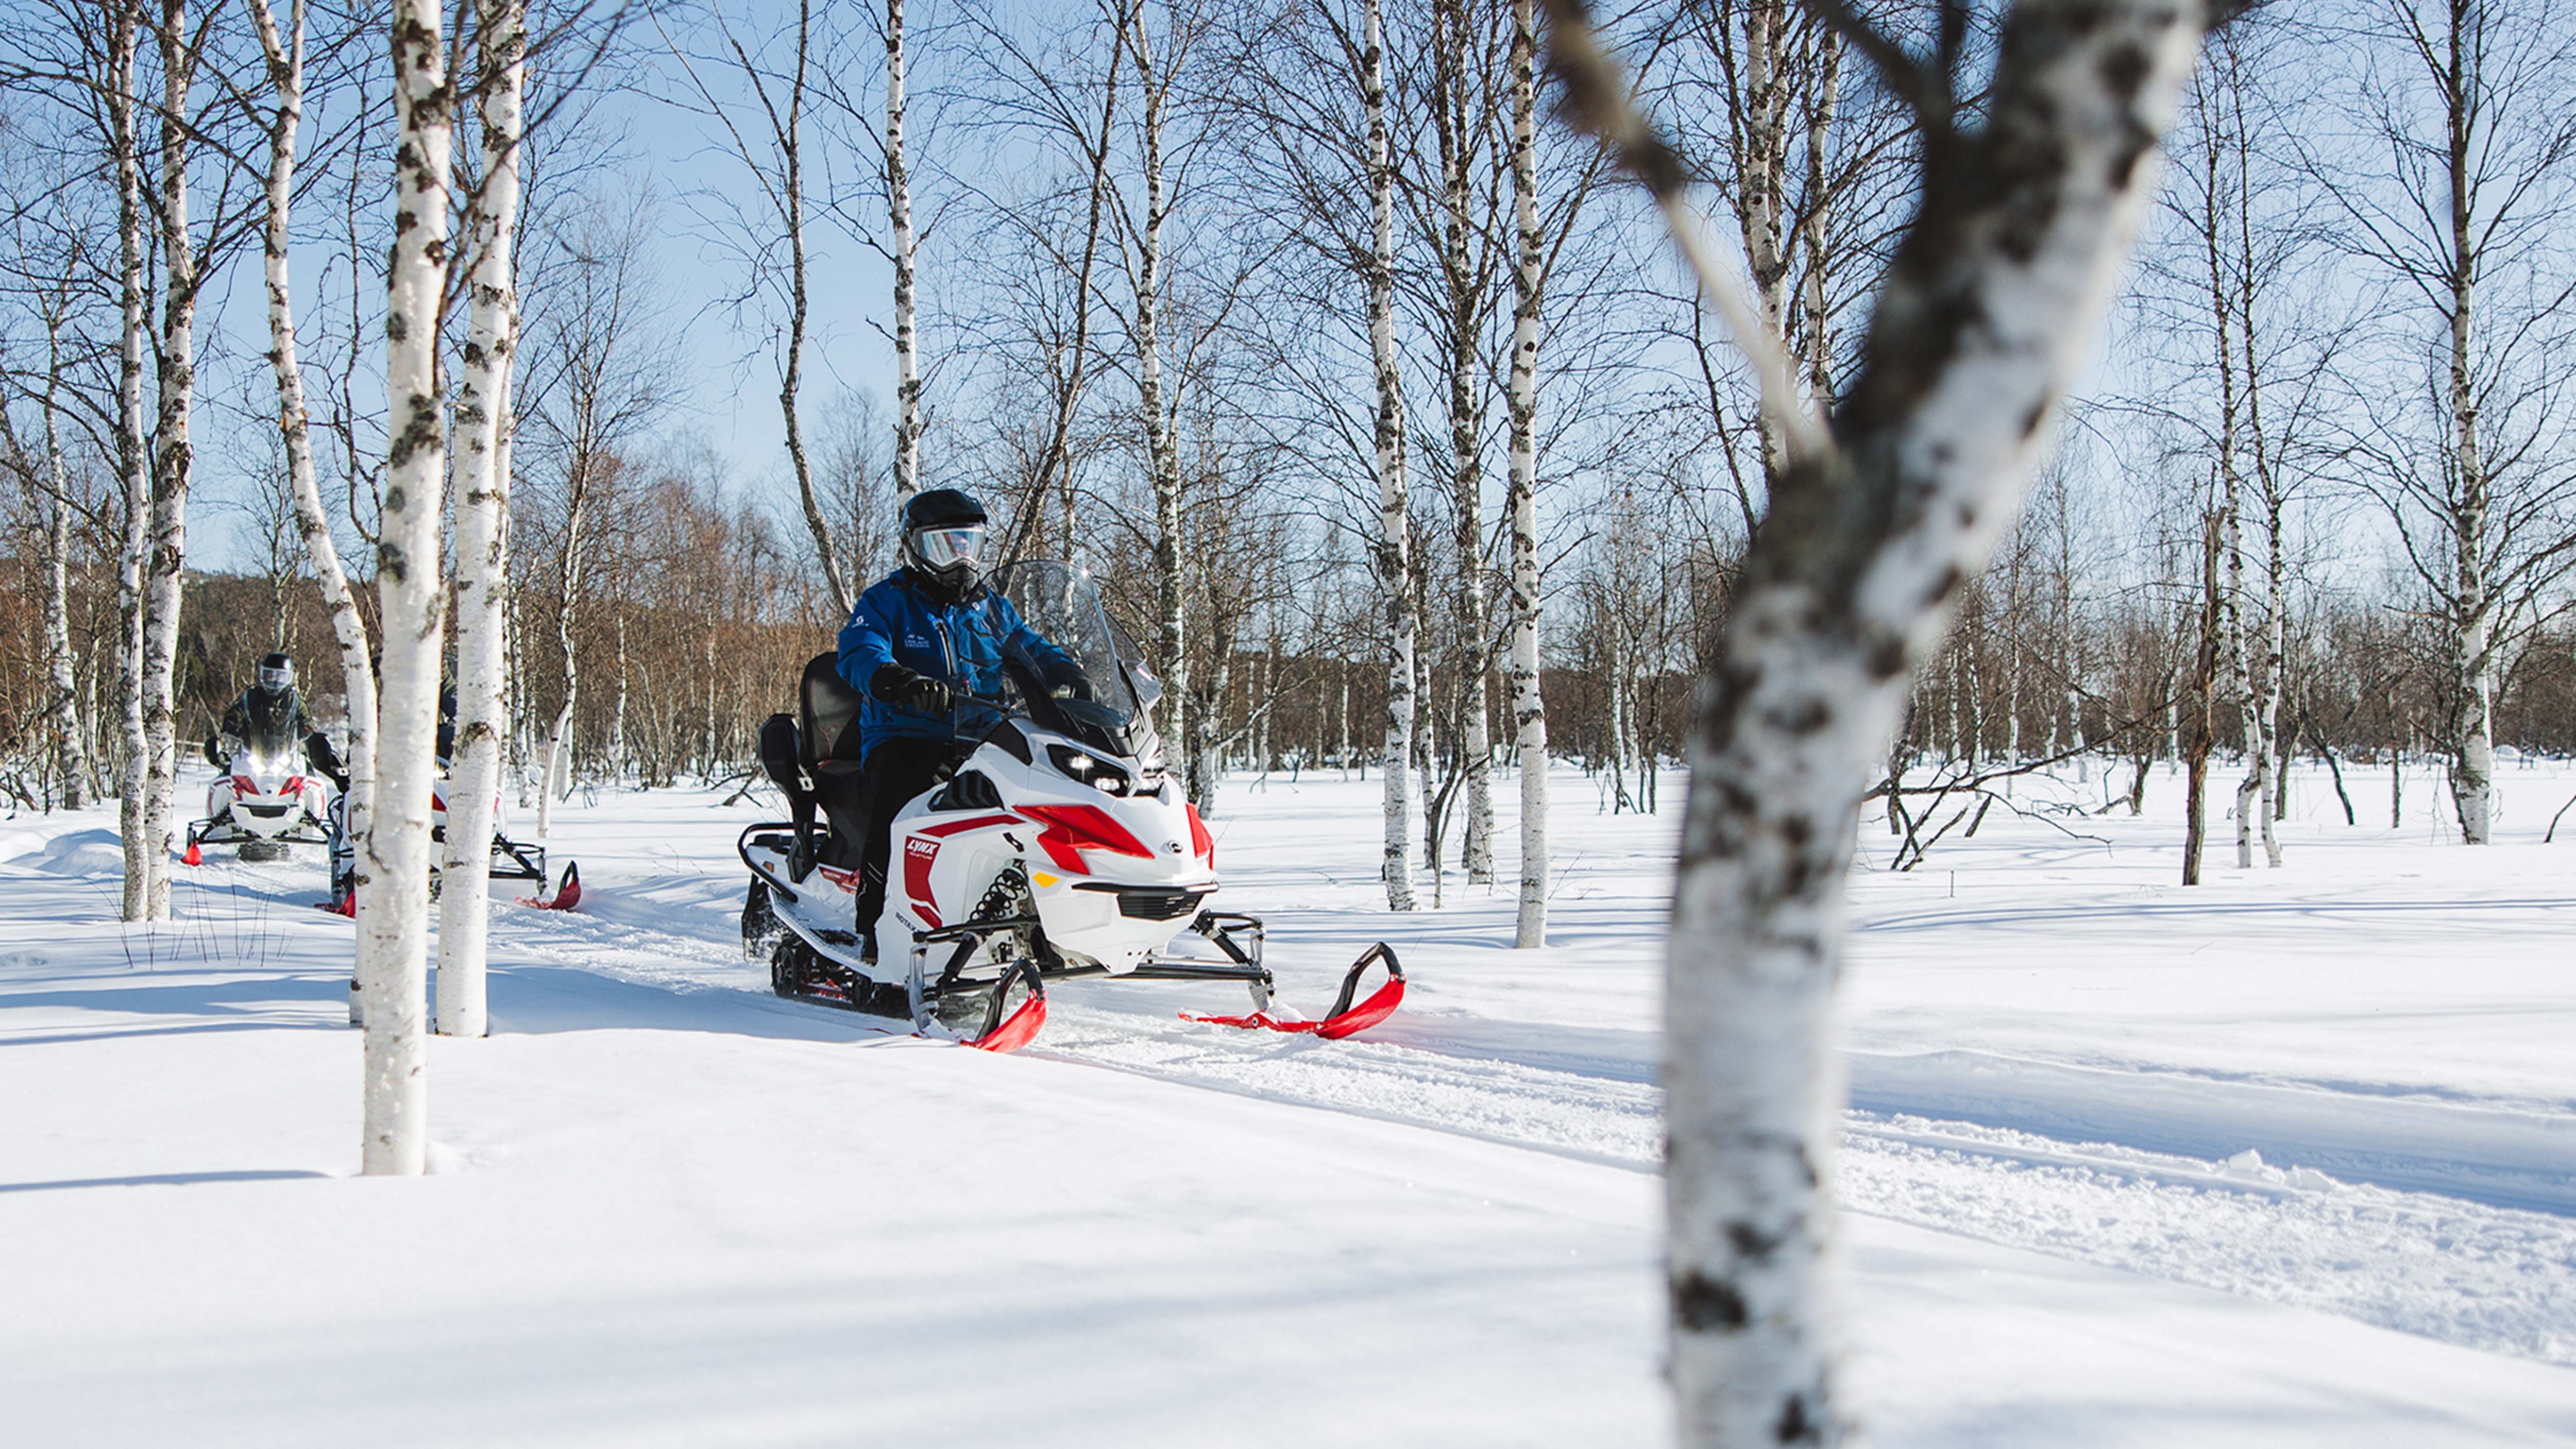 Lynx Adventure Electic snowmobile riding corner on forest trail